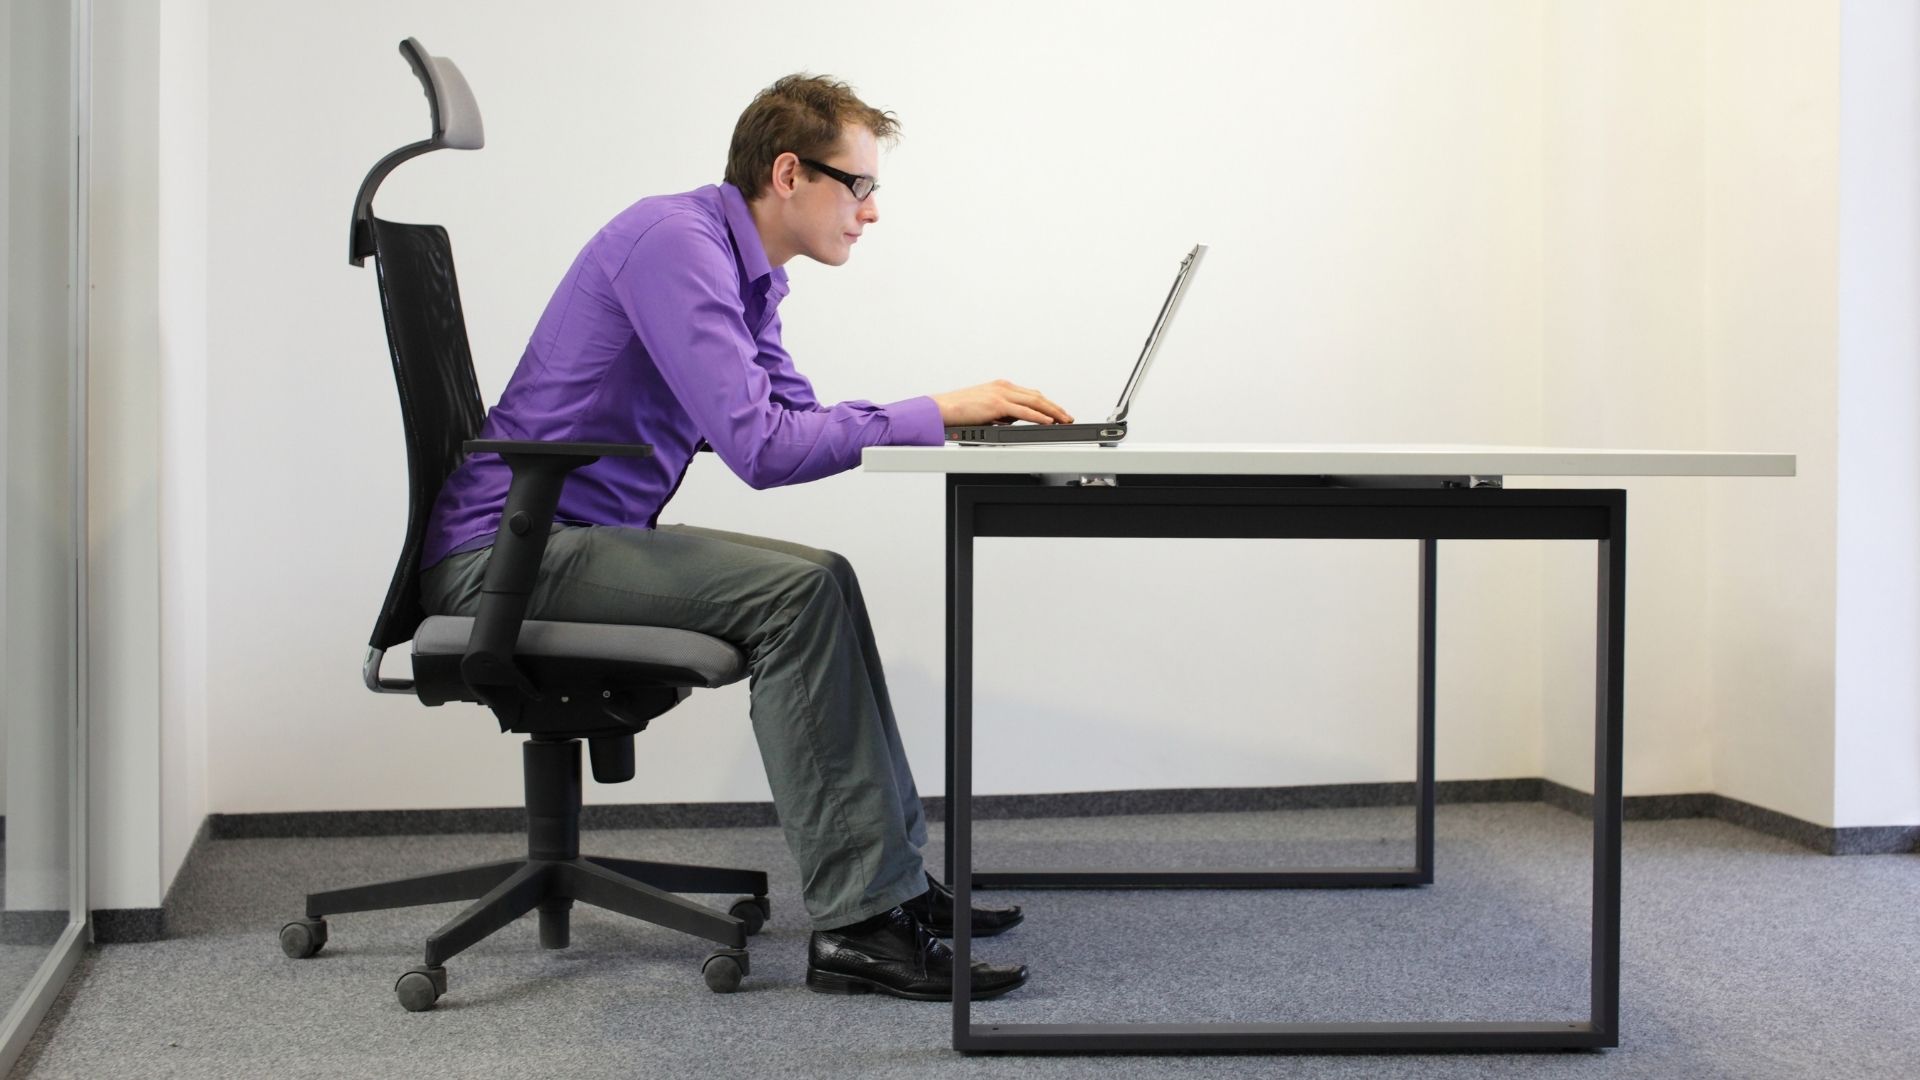 Ergonomic Injuries and Their Business Impacts